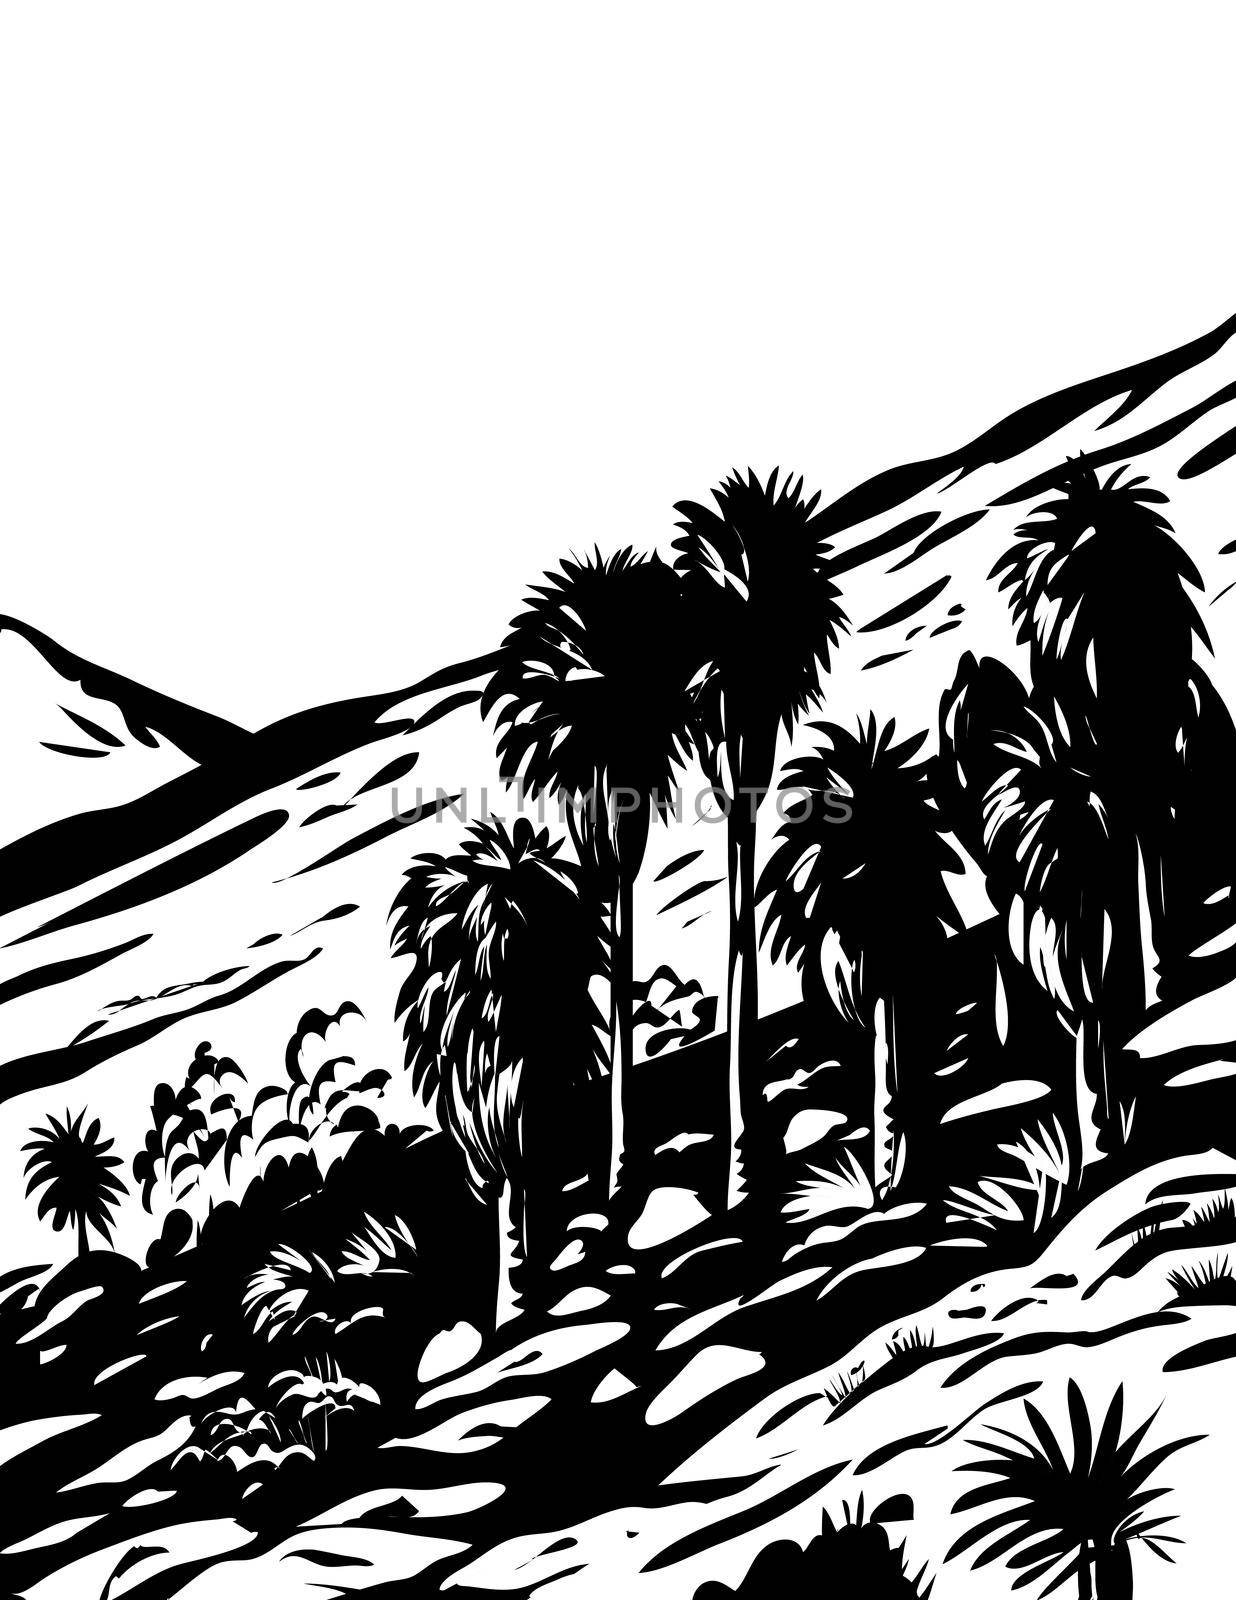 Fortynine Palms Oasis Trail in Joshua Tree National Park California USA WPA Woodcut Black and White Art  by patrimonio